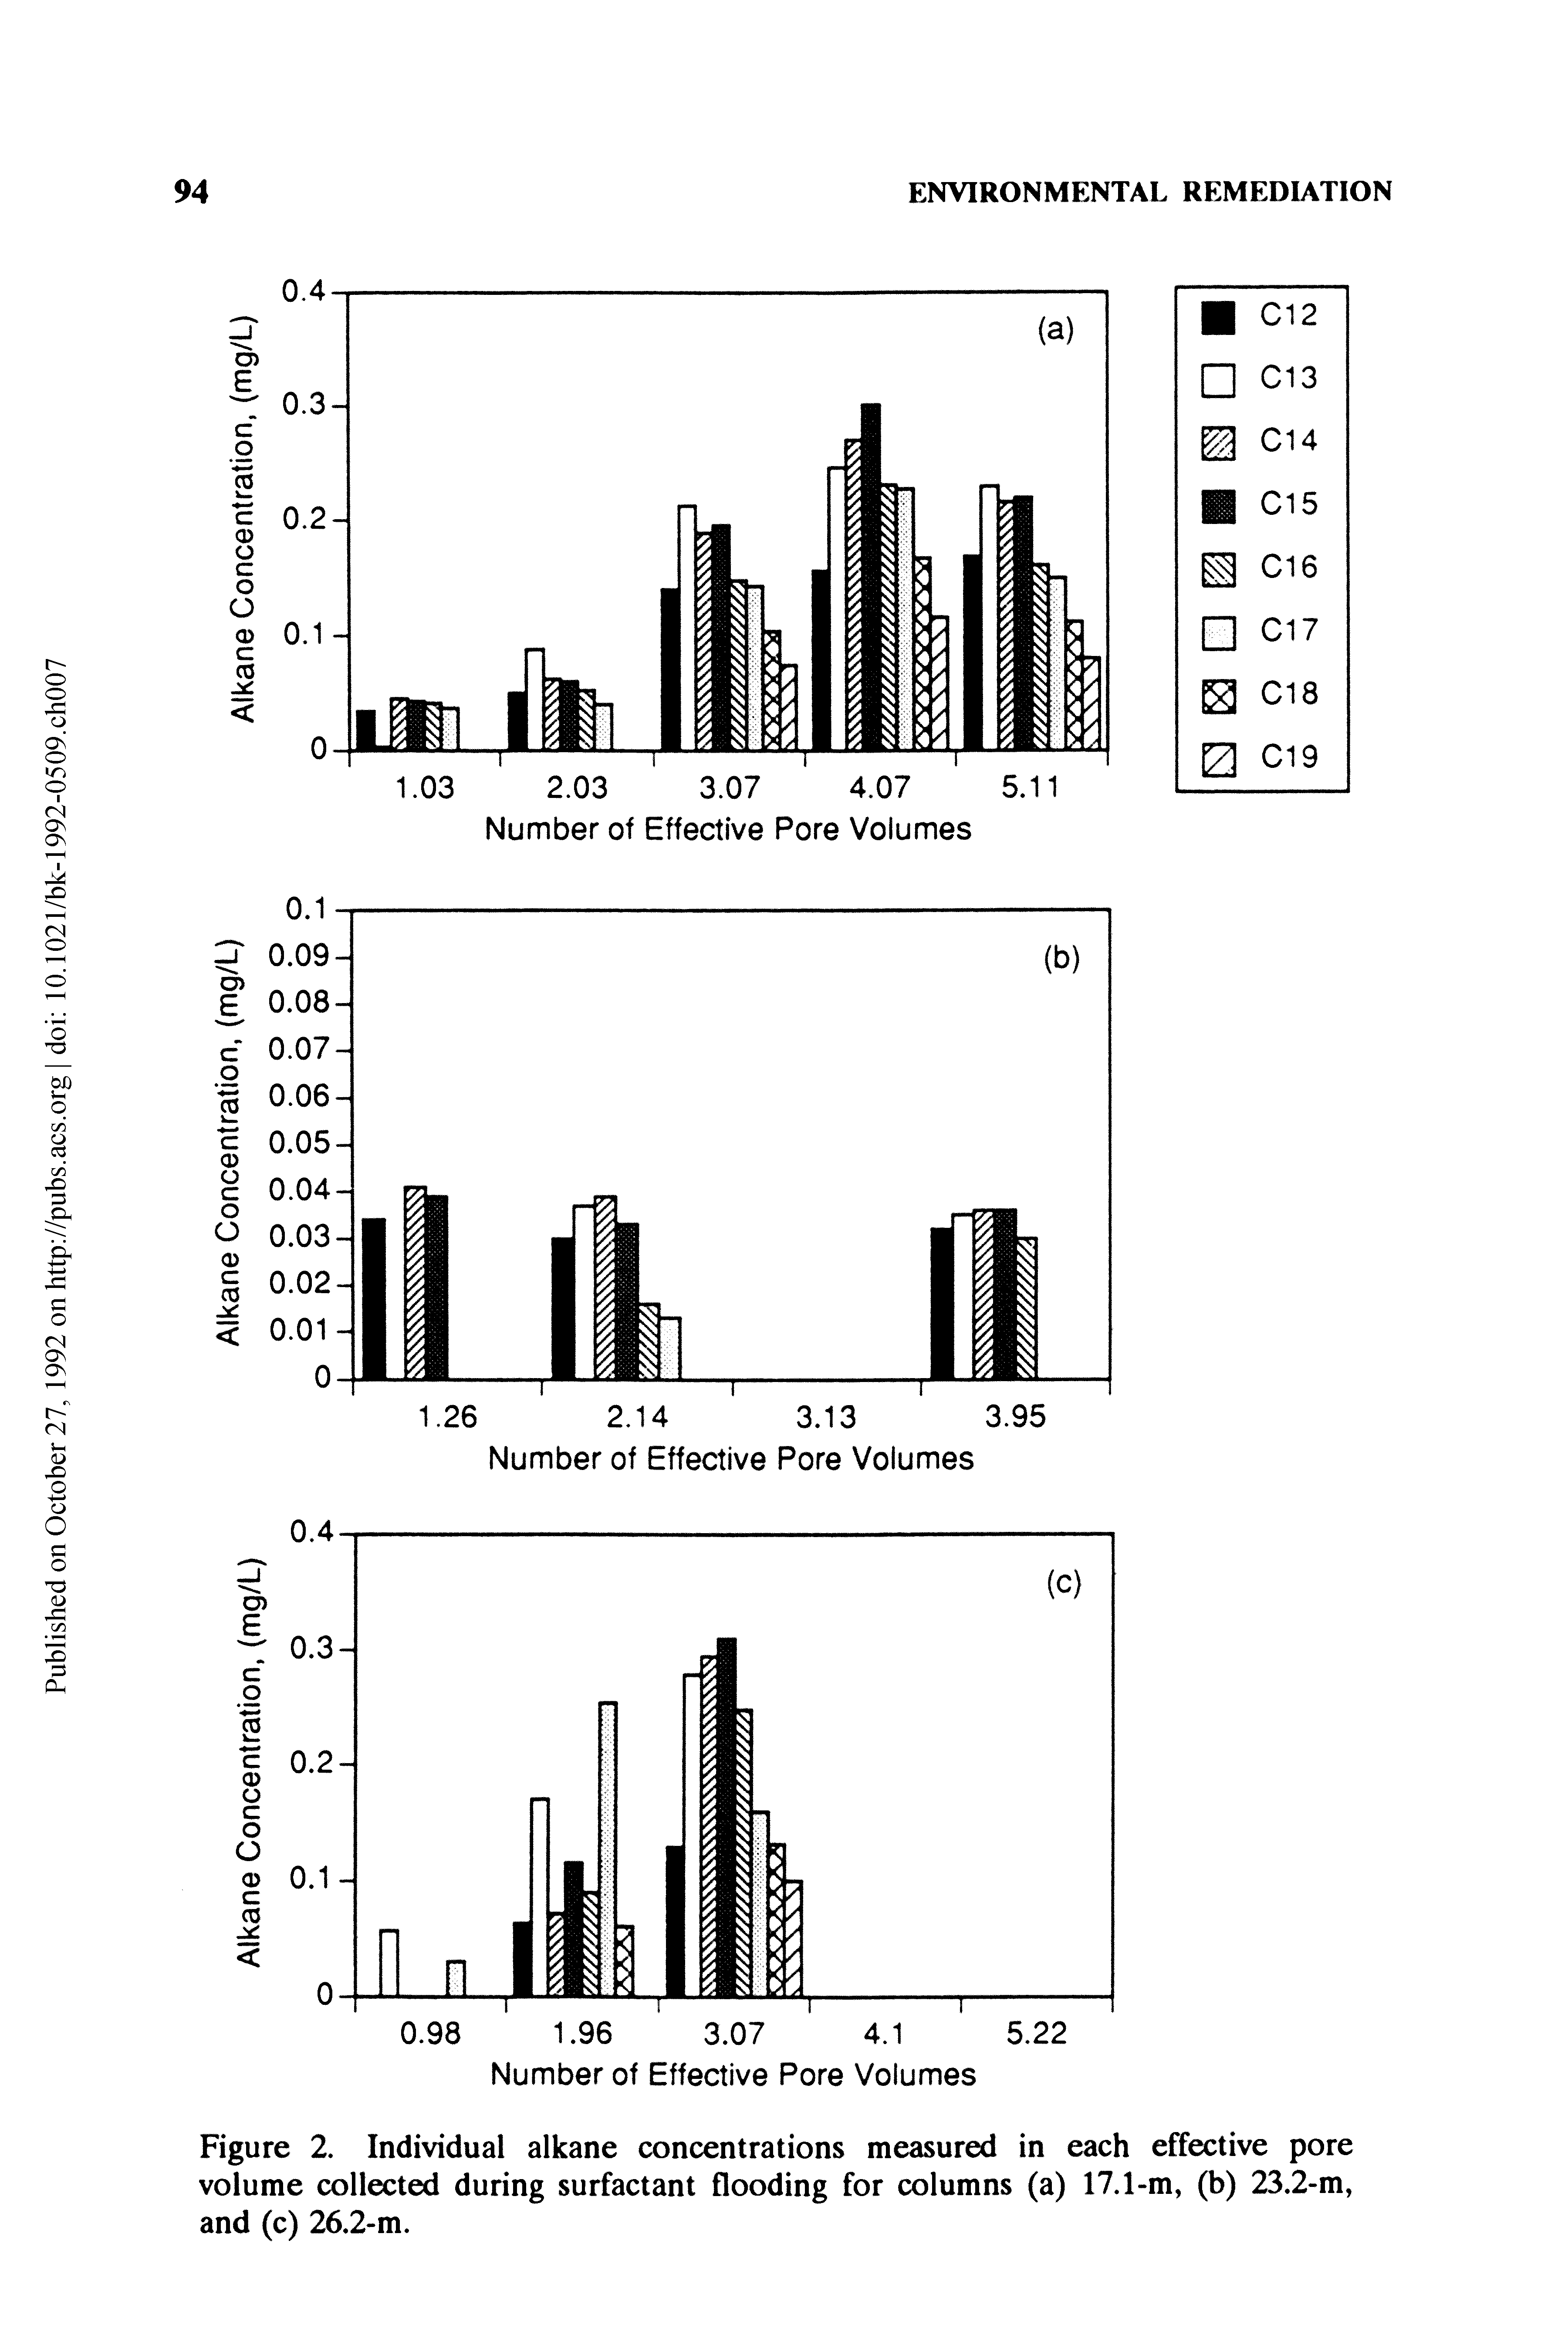 Figure 2. Individual alkane concentrations measured in each effective pore volume collected during surfactant flooding for columns (a) 17.1-m, (b) 23.2-m, and (c) 26.2-m.